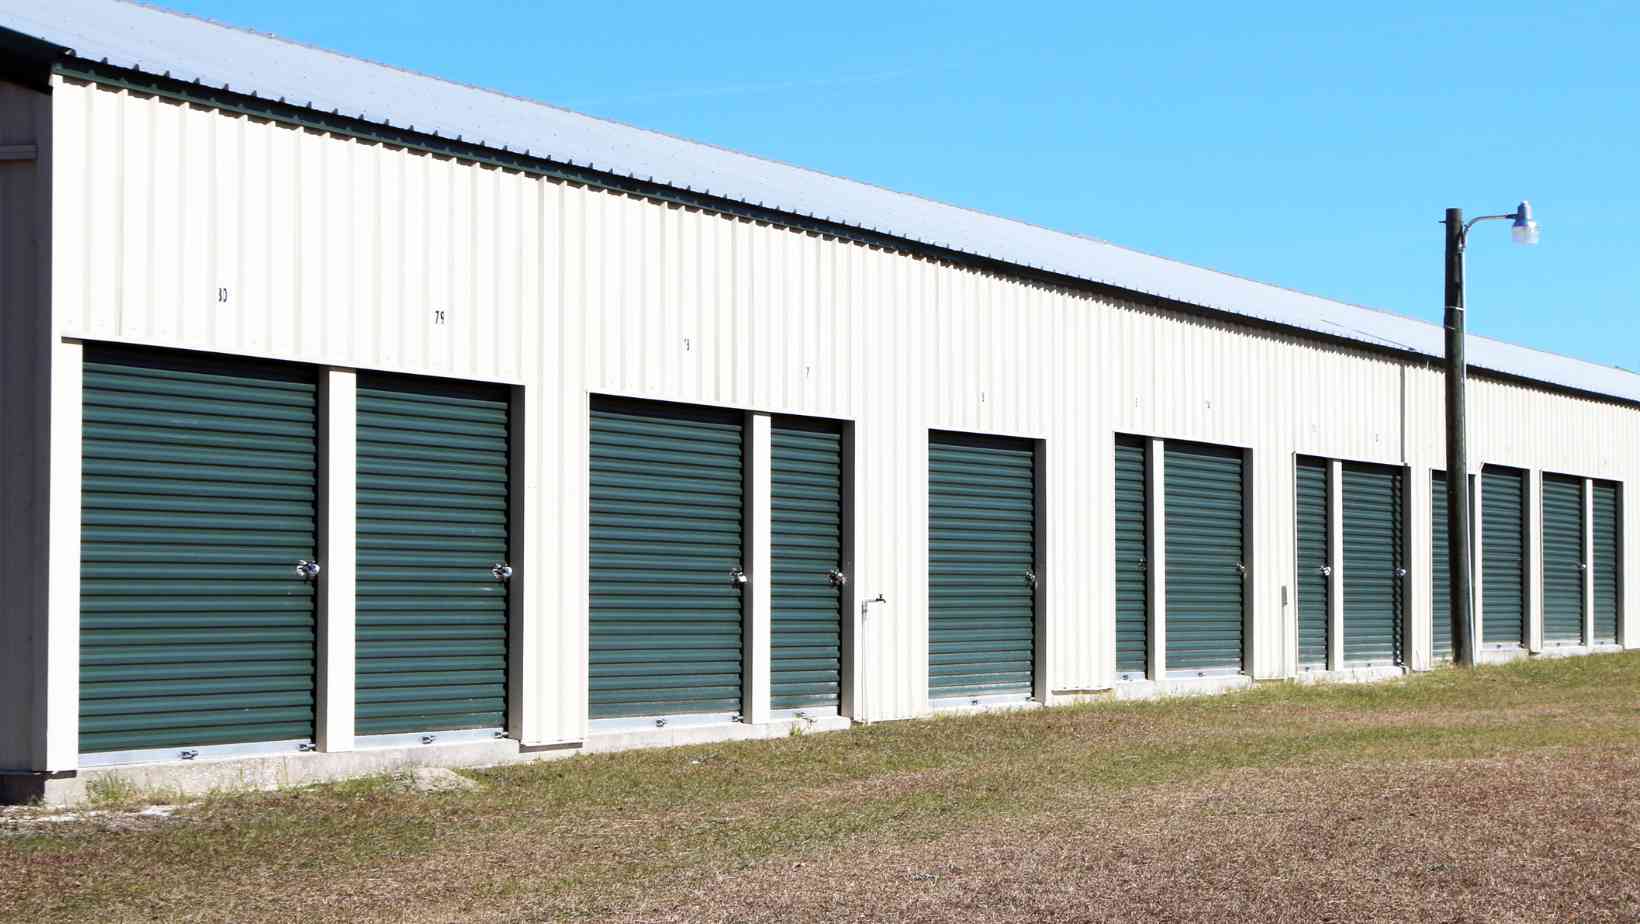 Choose Our Best Shutter Services for High-Risk Buildings and Facilities